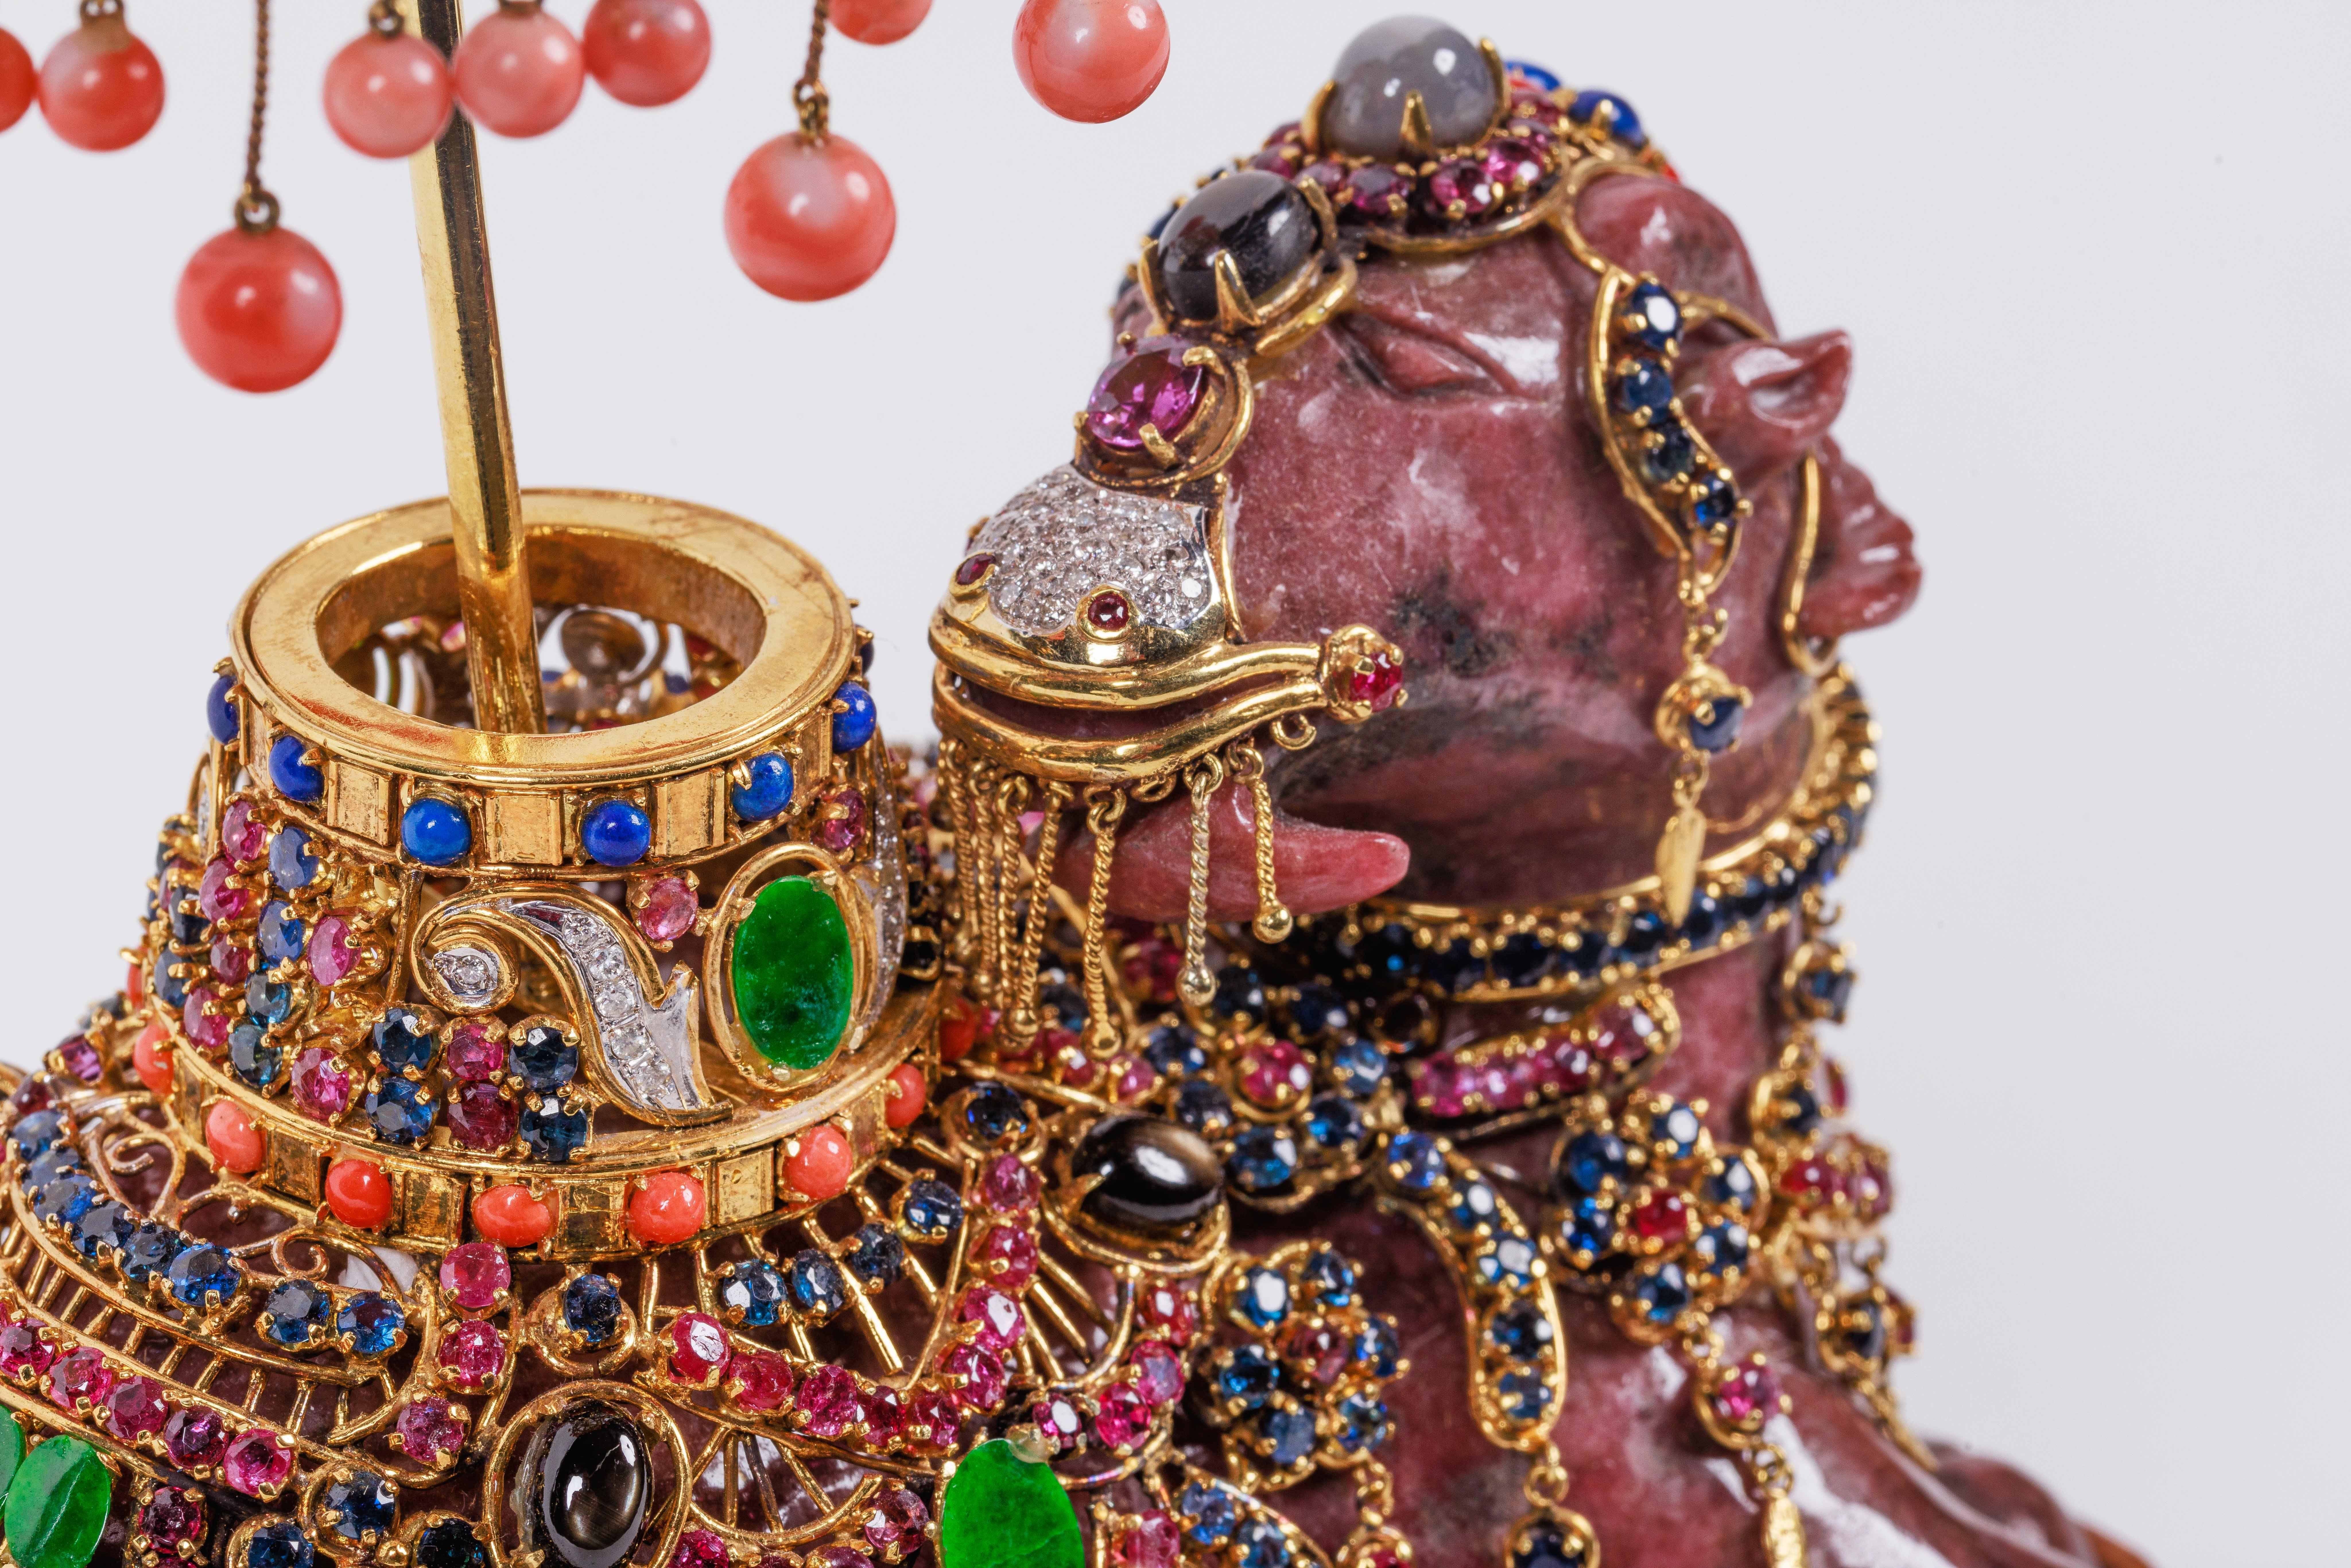 Exquisite 14K Gold, Diamonds, Emeralds, Rubies, Semi Precious Stone Camel In Good Condition For Sale In New York, NY